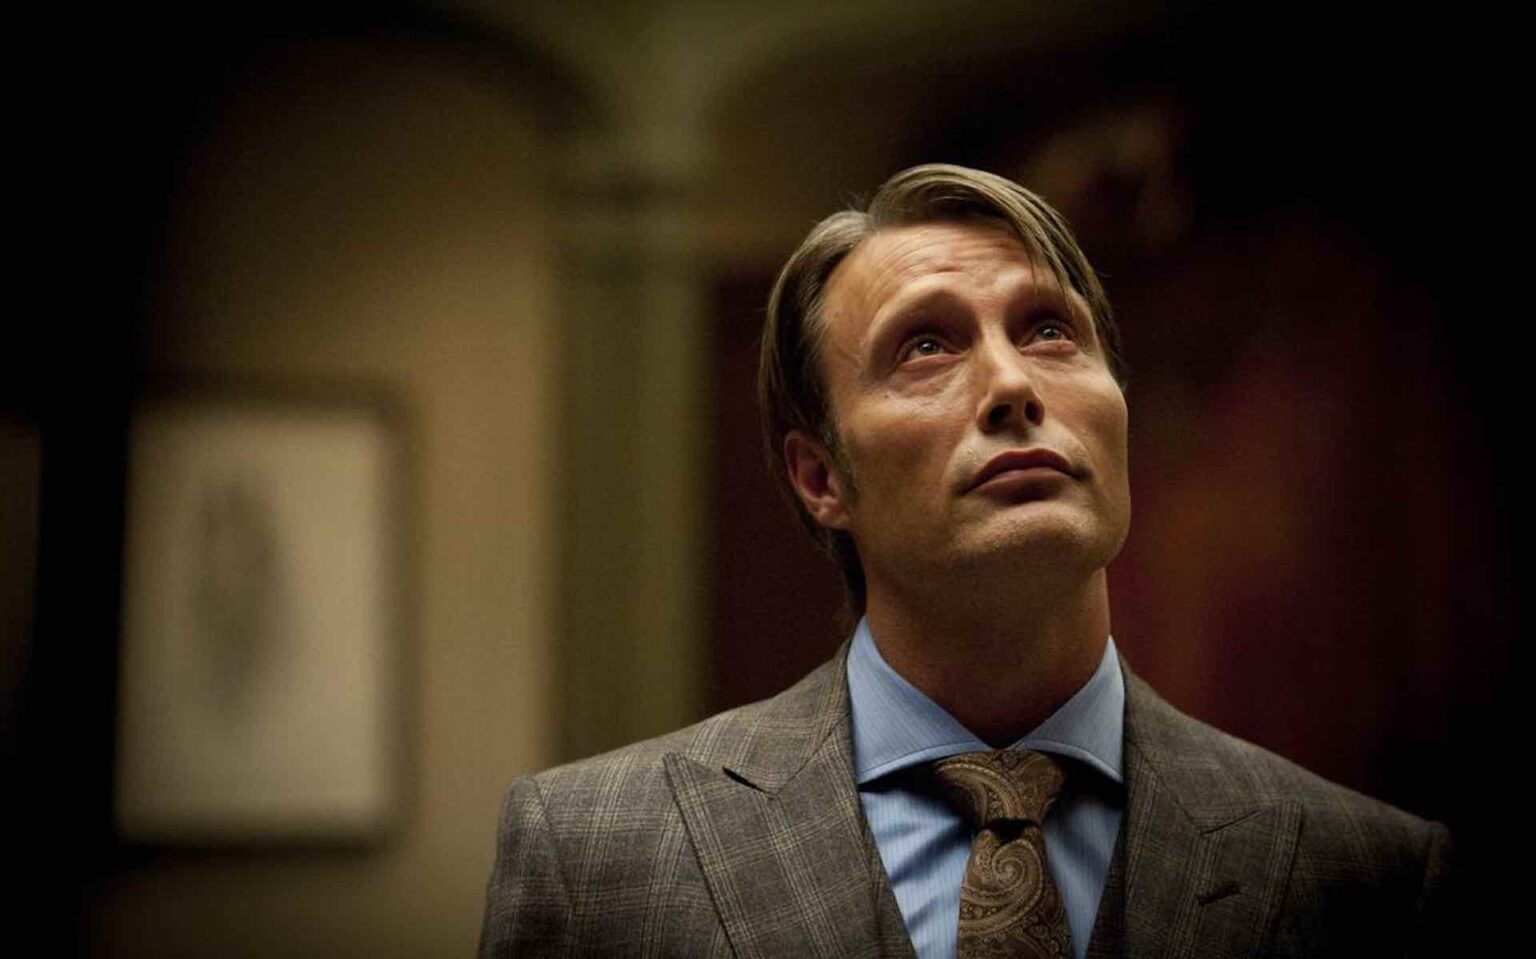 There’s potentially a new season of 'Hannibal' on the horizon! Here's everything we know about the cast and their reunion.